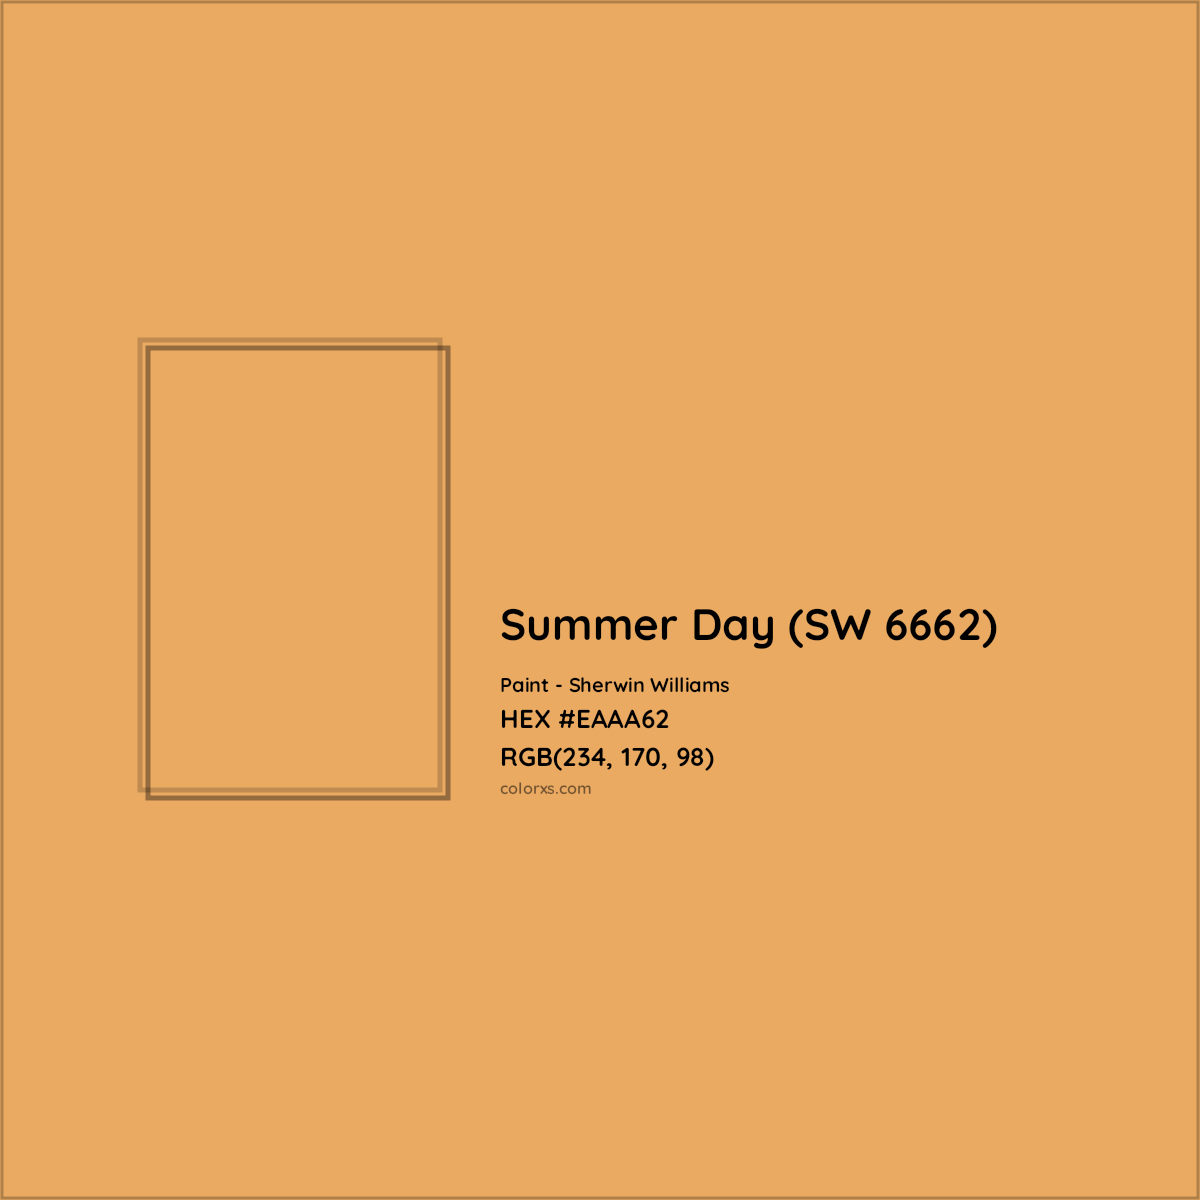 HEX #EAAA62 Summer Day (SW 6662) Paint Sherwin Williams - Color Code